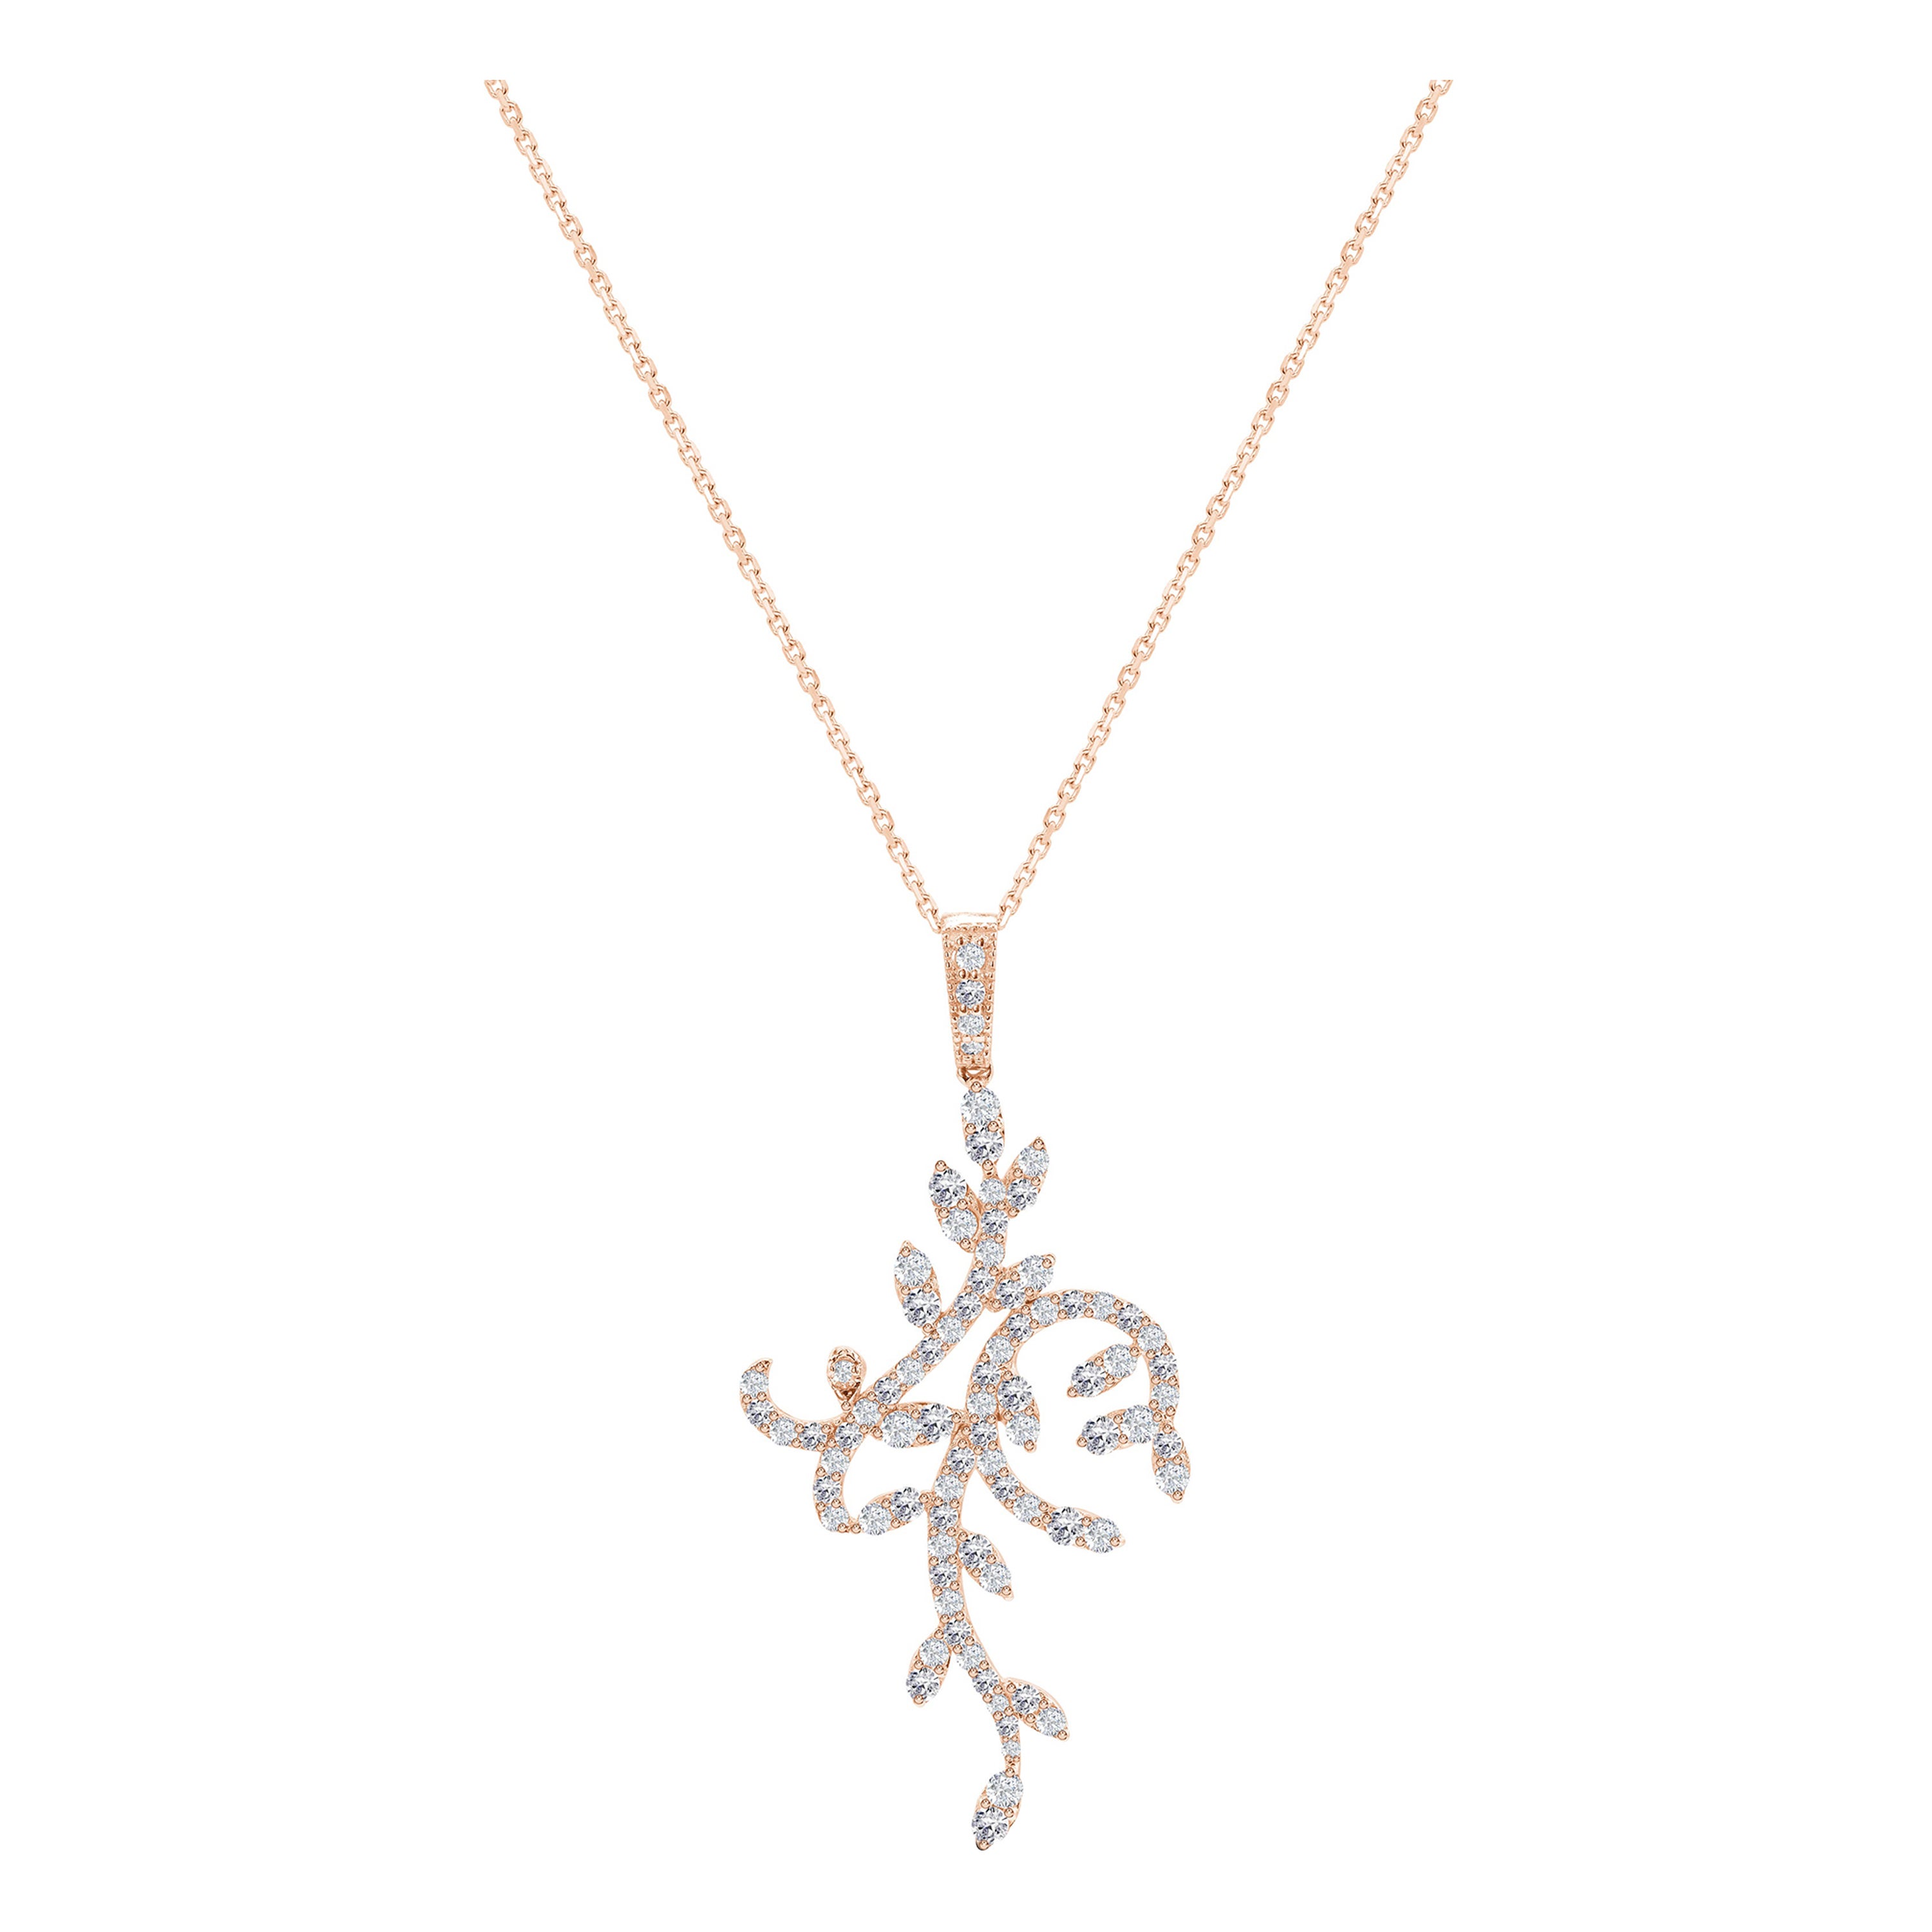 1.35 Ct Diamond Leaf Necklace in 14K Gold For Sale